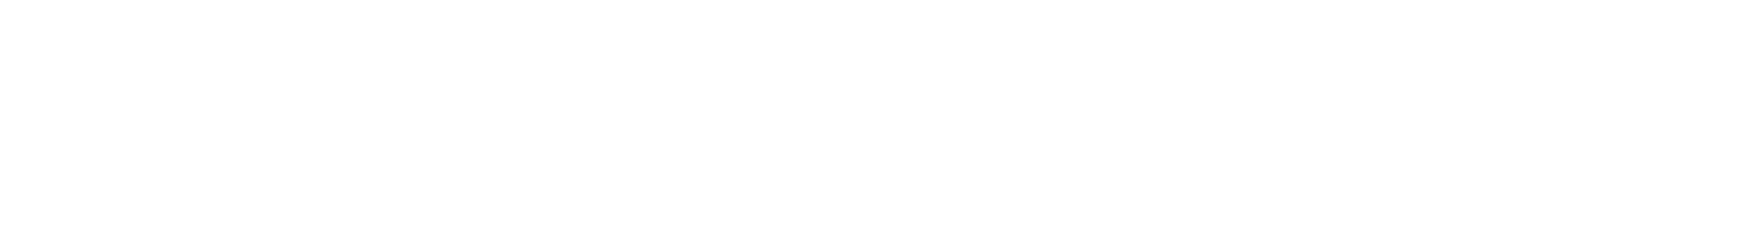 Destination 2030. The passionate pursuit of sustainable water, sanitation, and hygiene services for all